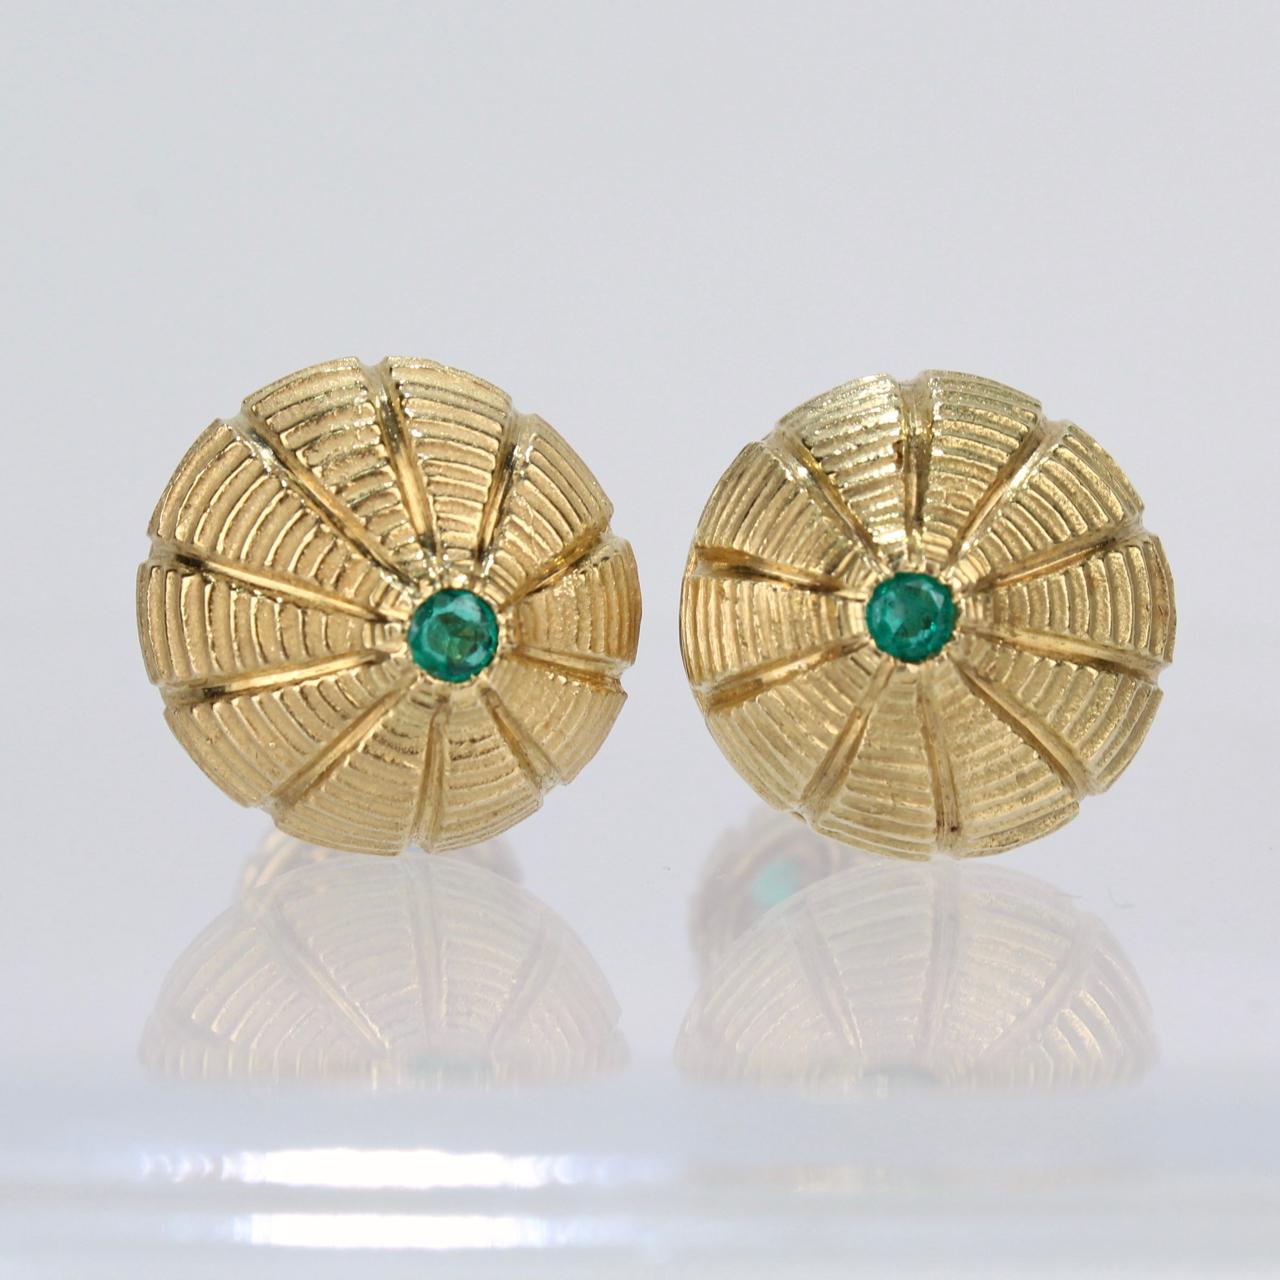 A fine pair of 'Taj Mahal' cufflinks in 18-karat gold by Jean Schlumberger for Tiffany & Co.

Each set with small emeralds to the front and reverse.

Found in a Rhinebeck, NY estate, the cufflinks still remarkably retain their original box. The box